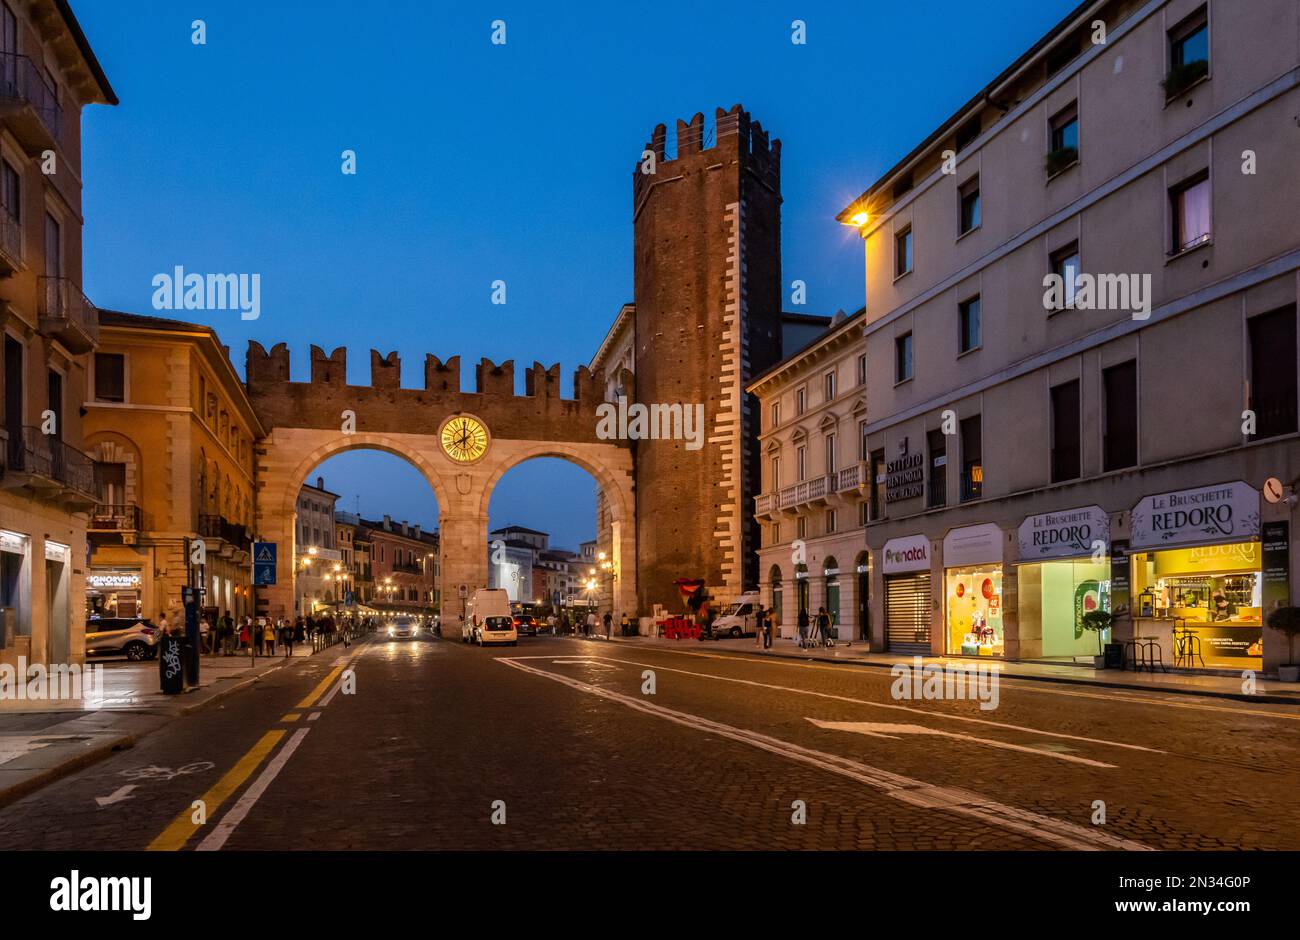 Medieval entrance of historical city Verona - arches of the town gate - Veneto region in northern Italy, Europe - September 9, 2021 Stock Photo